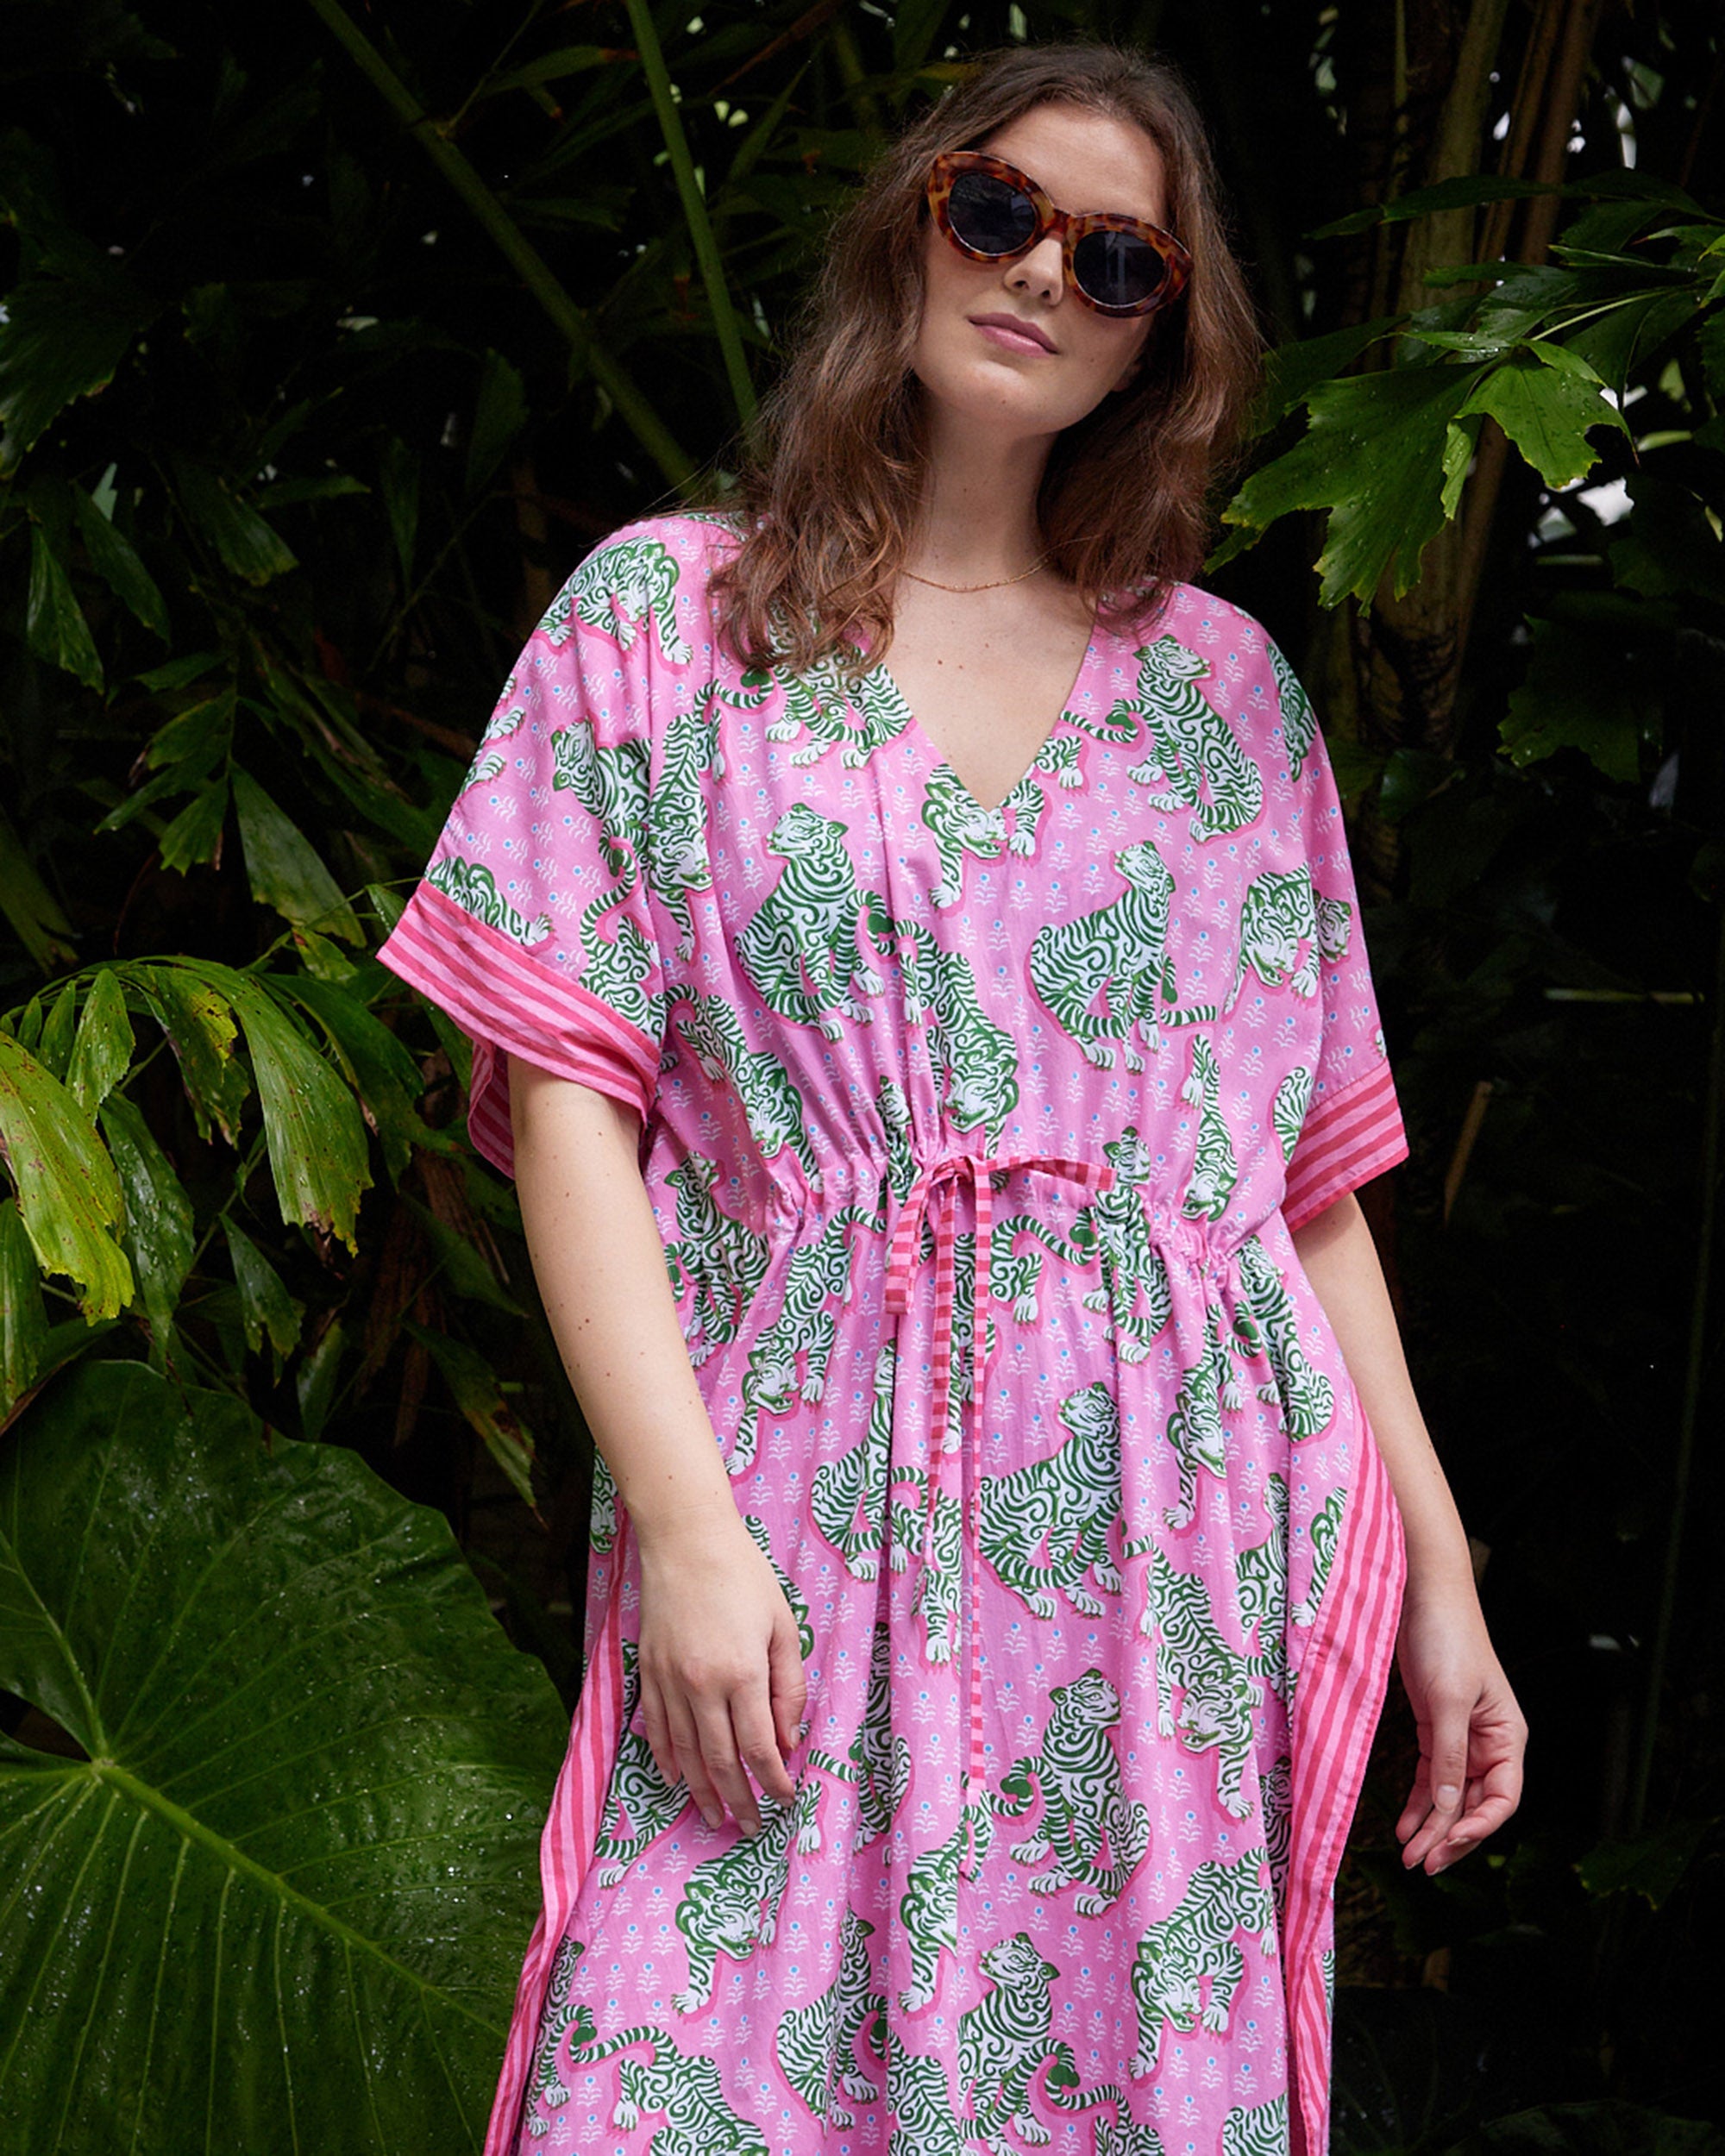 PF + Lime Ricki Tiger Queen - Let's Cruise Caftan - Pink Limo - Printfresh